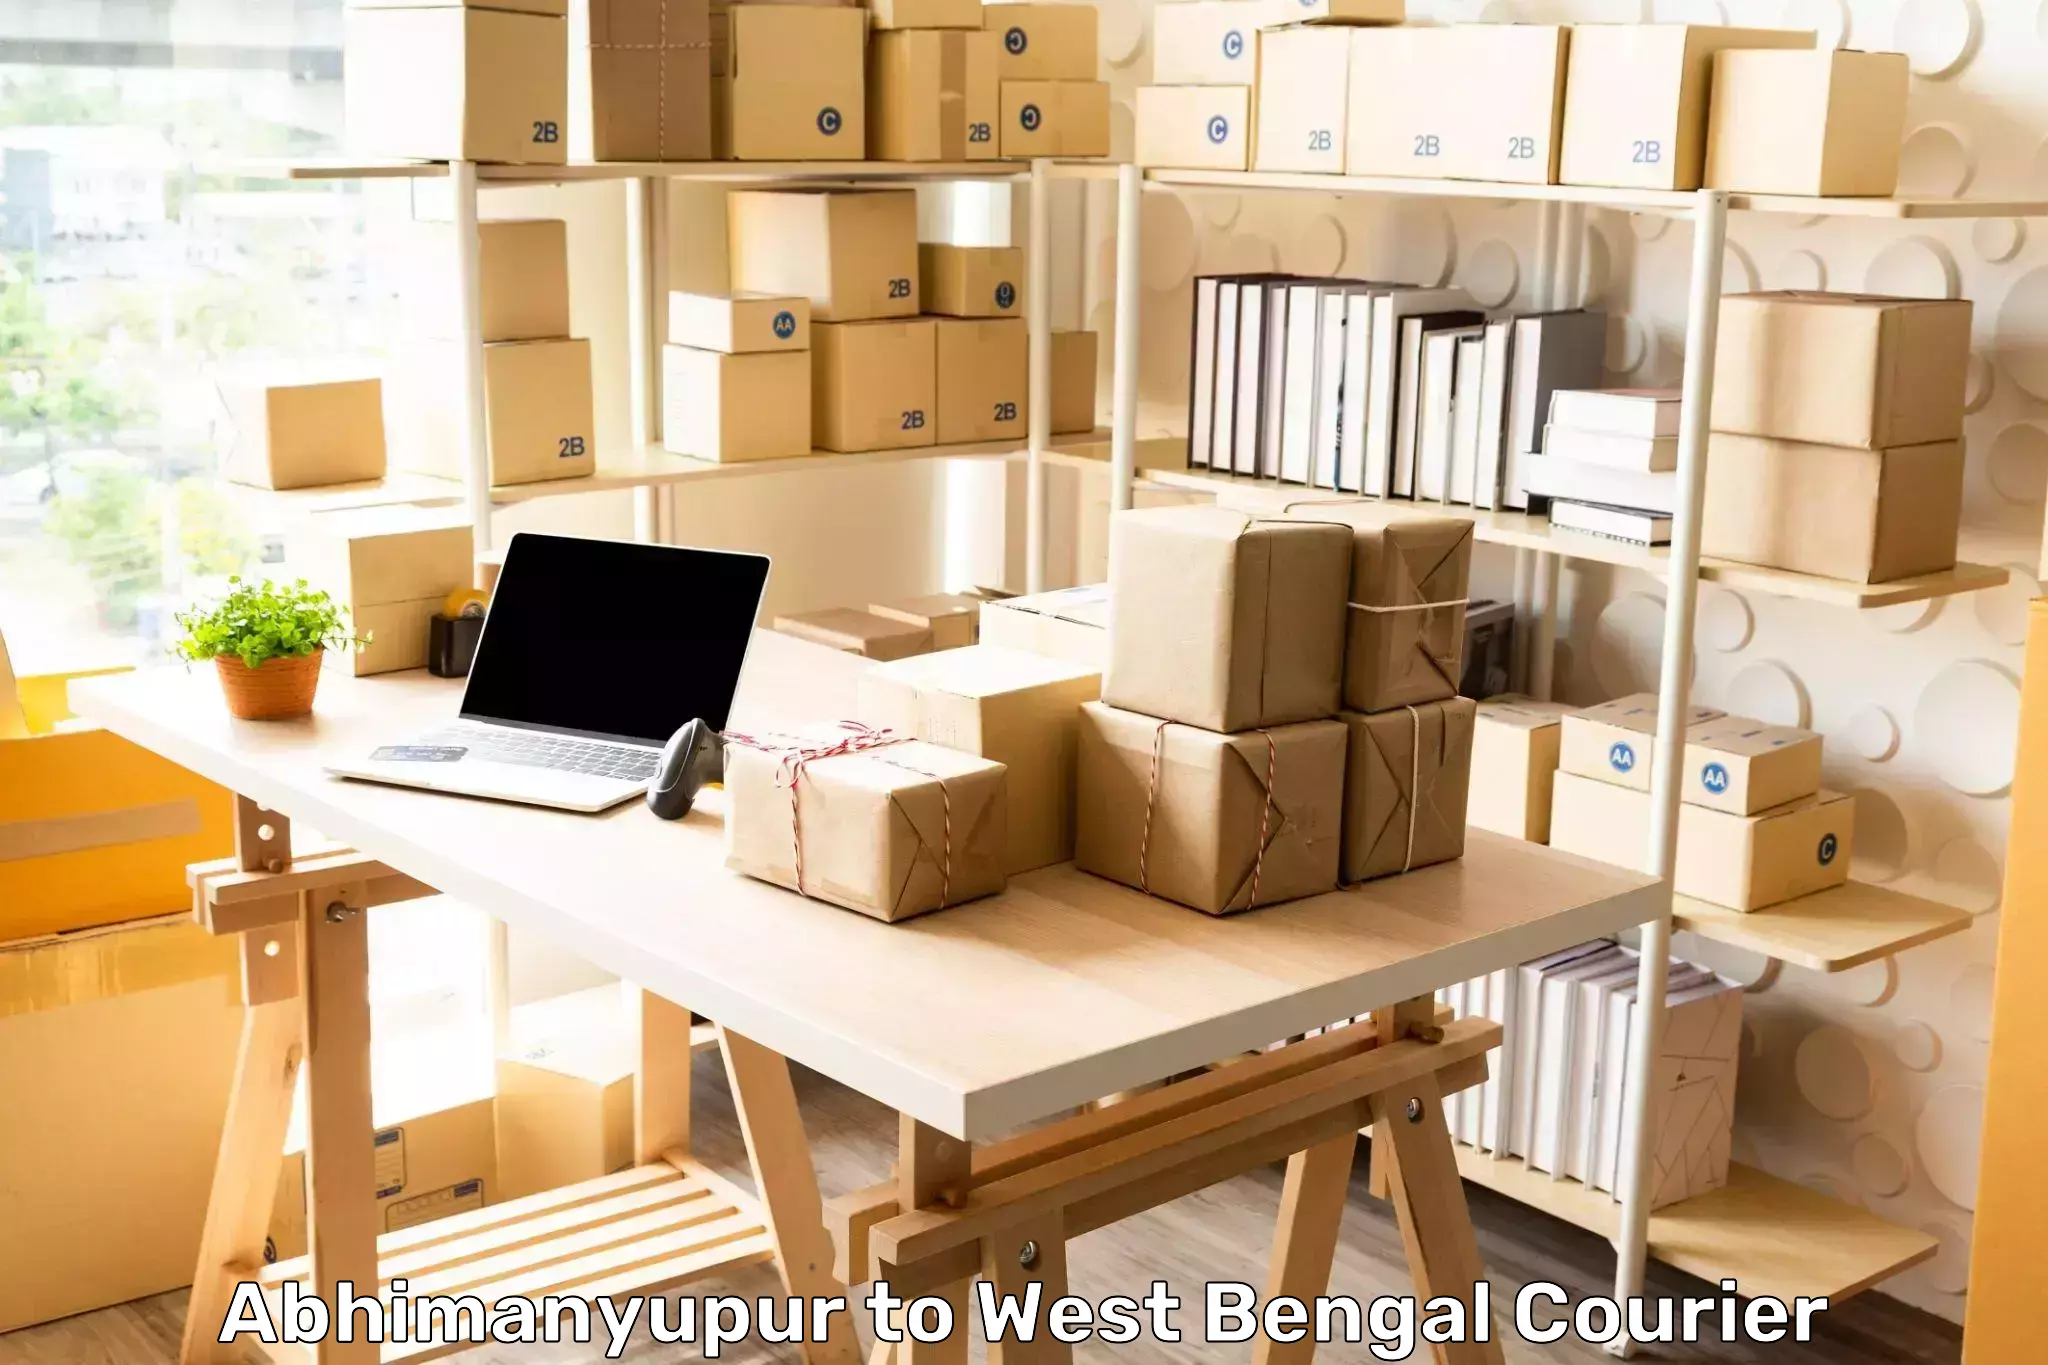 Small business couriers Abhimanyupur to Purba Medinipur